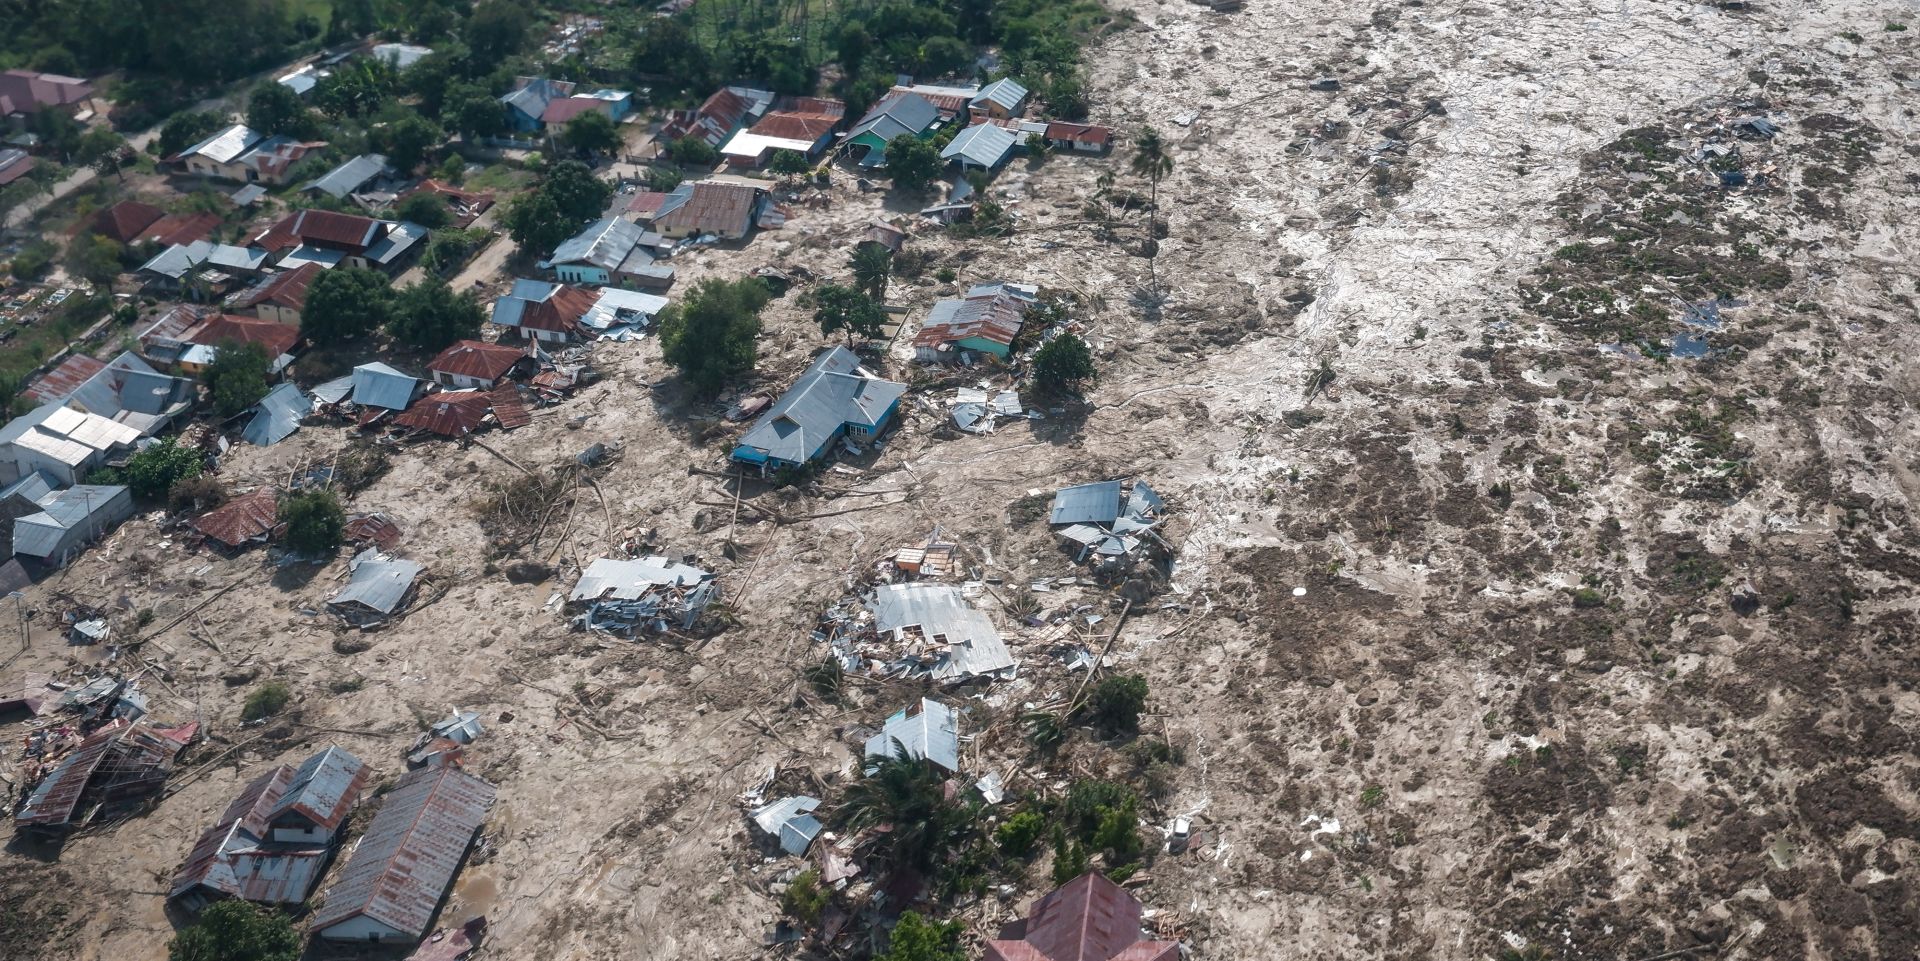 epa07061258 An aerial view of an earthquake devastated area in Petobo Village, Palu, Central Sulawesi, Indonesia, 01 October 2018. According to reports, at least 844 people have died as a result of a series of powerful earthquakes that hit central Sulawesi on 28 September 2018 and triggered a tsunami.  EPA/HARIANDI HAFID